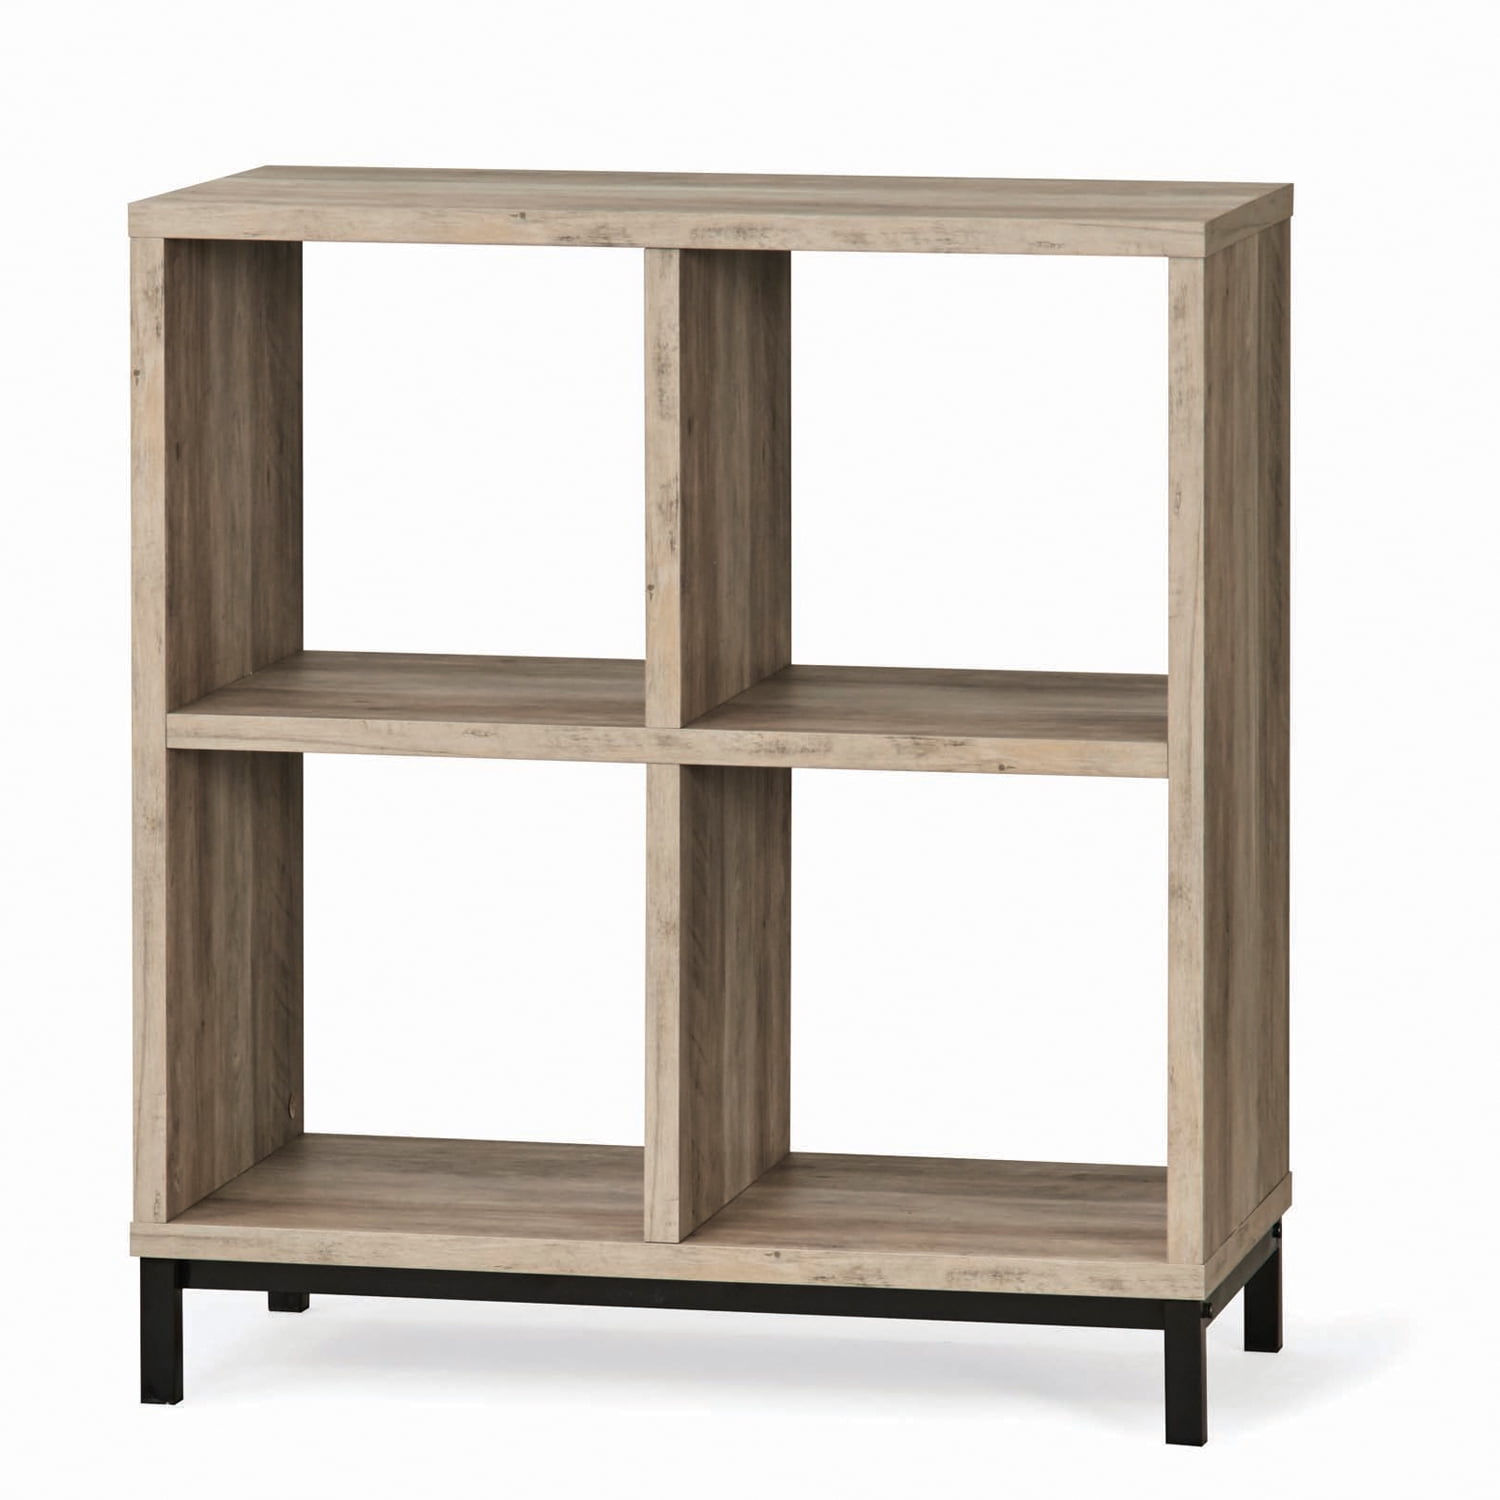 White, 4-Cube Bookshelf Square Storage Cabinet 4-Cube Organizers Black, 6-Cube Weathered Better Homes and Gardens.